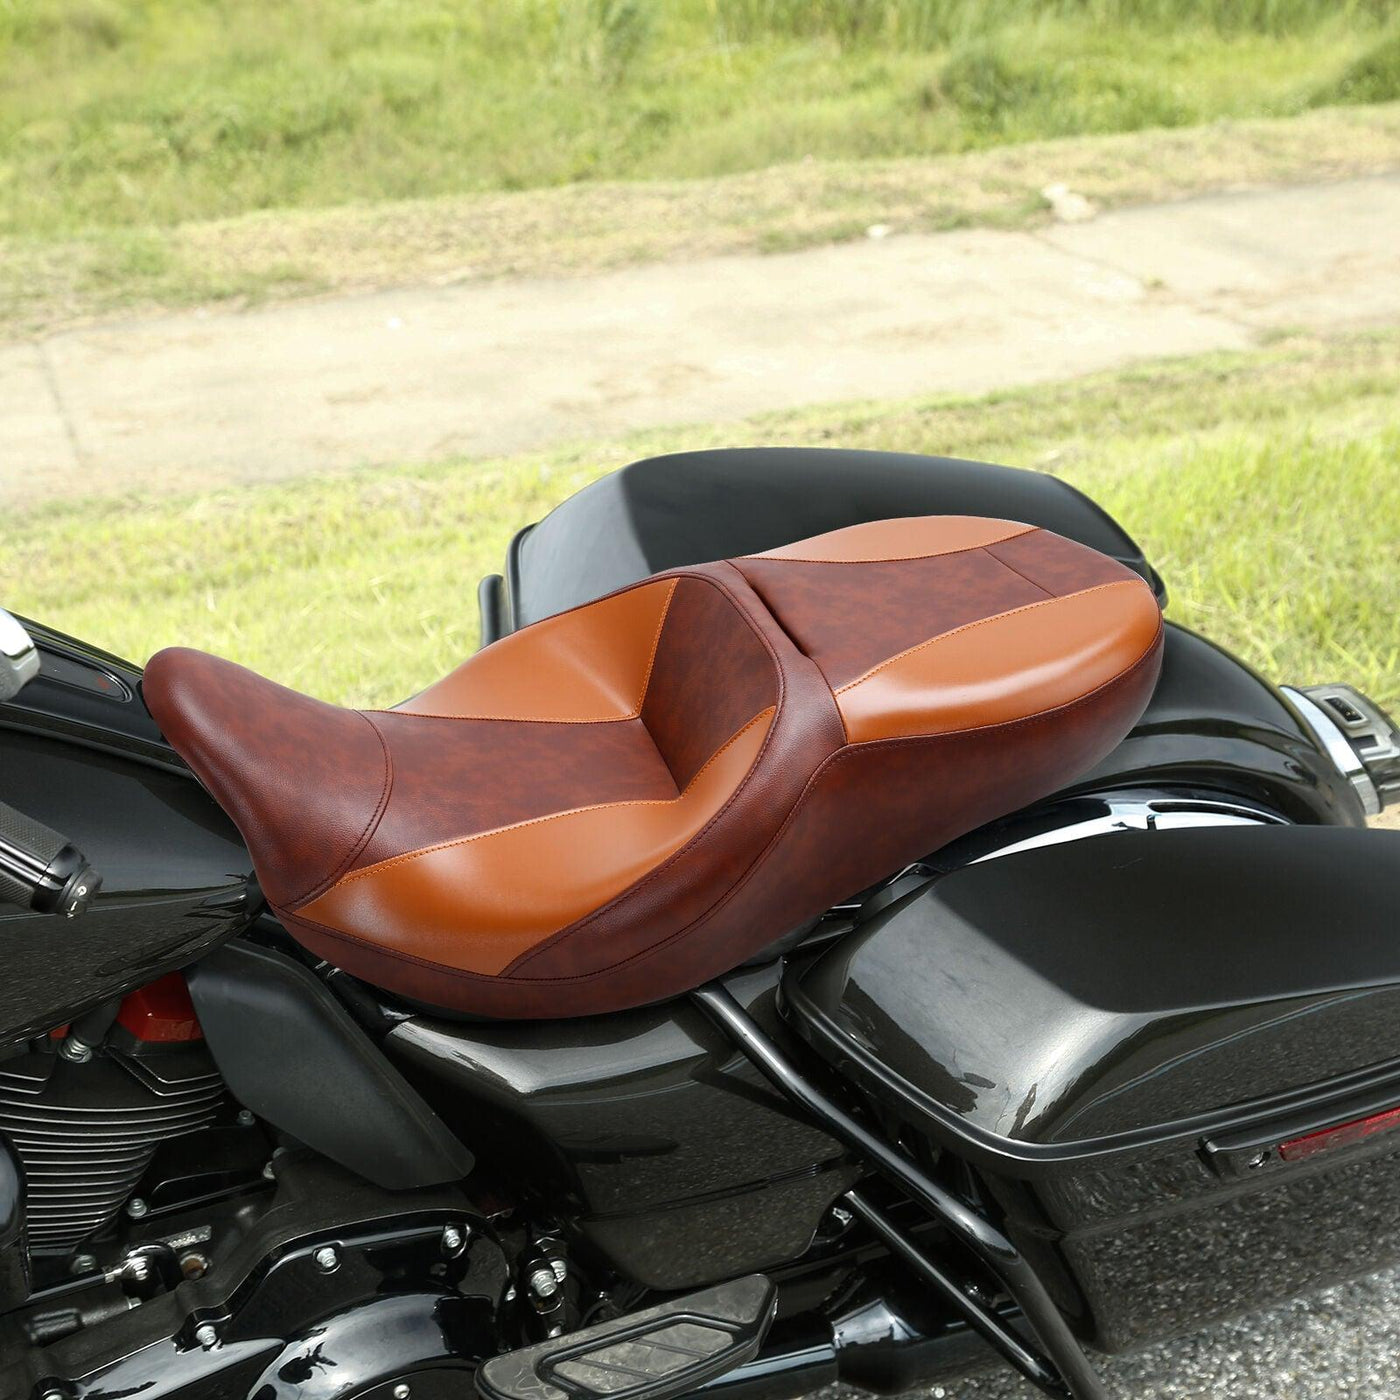 Desert Rider Passenger Seat Fit For Harley Electra Glide Road Glide 2009-2022 19 - Moto Life Products